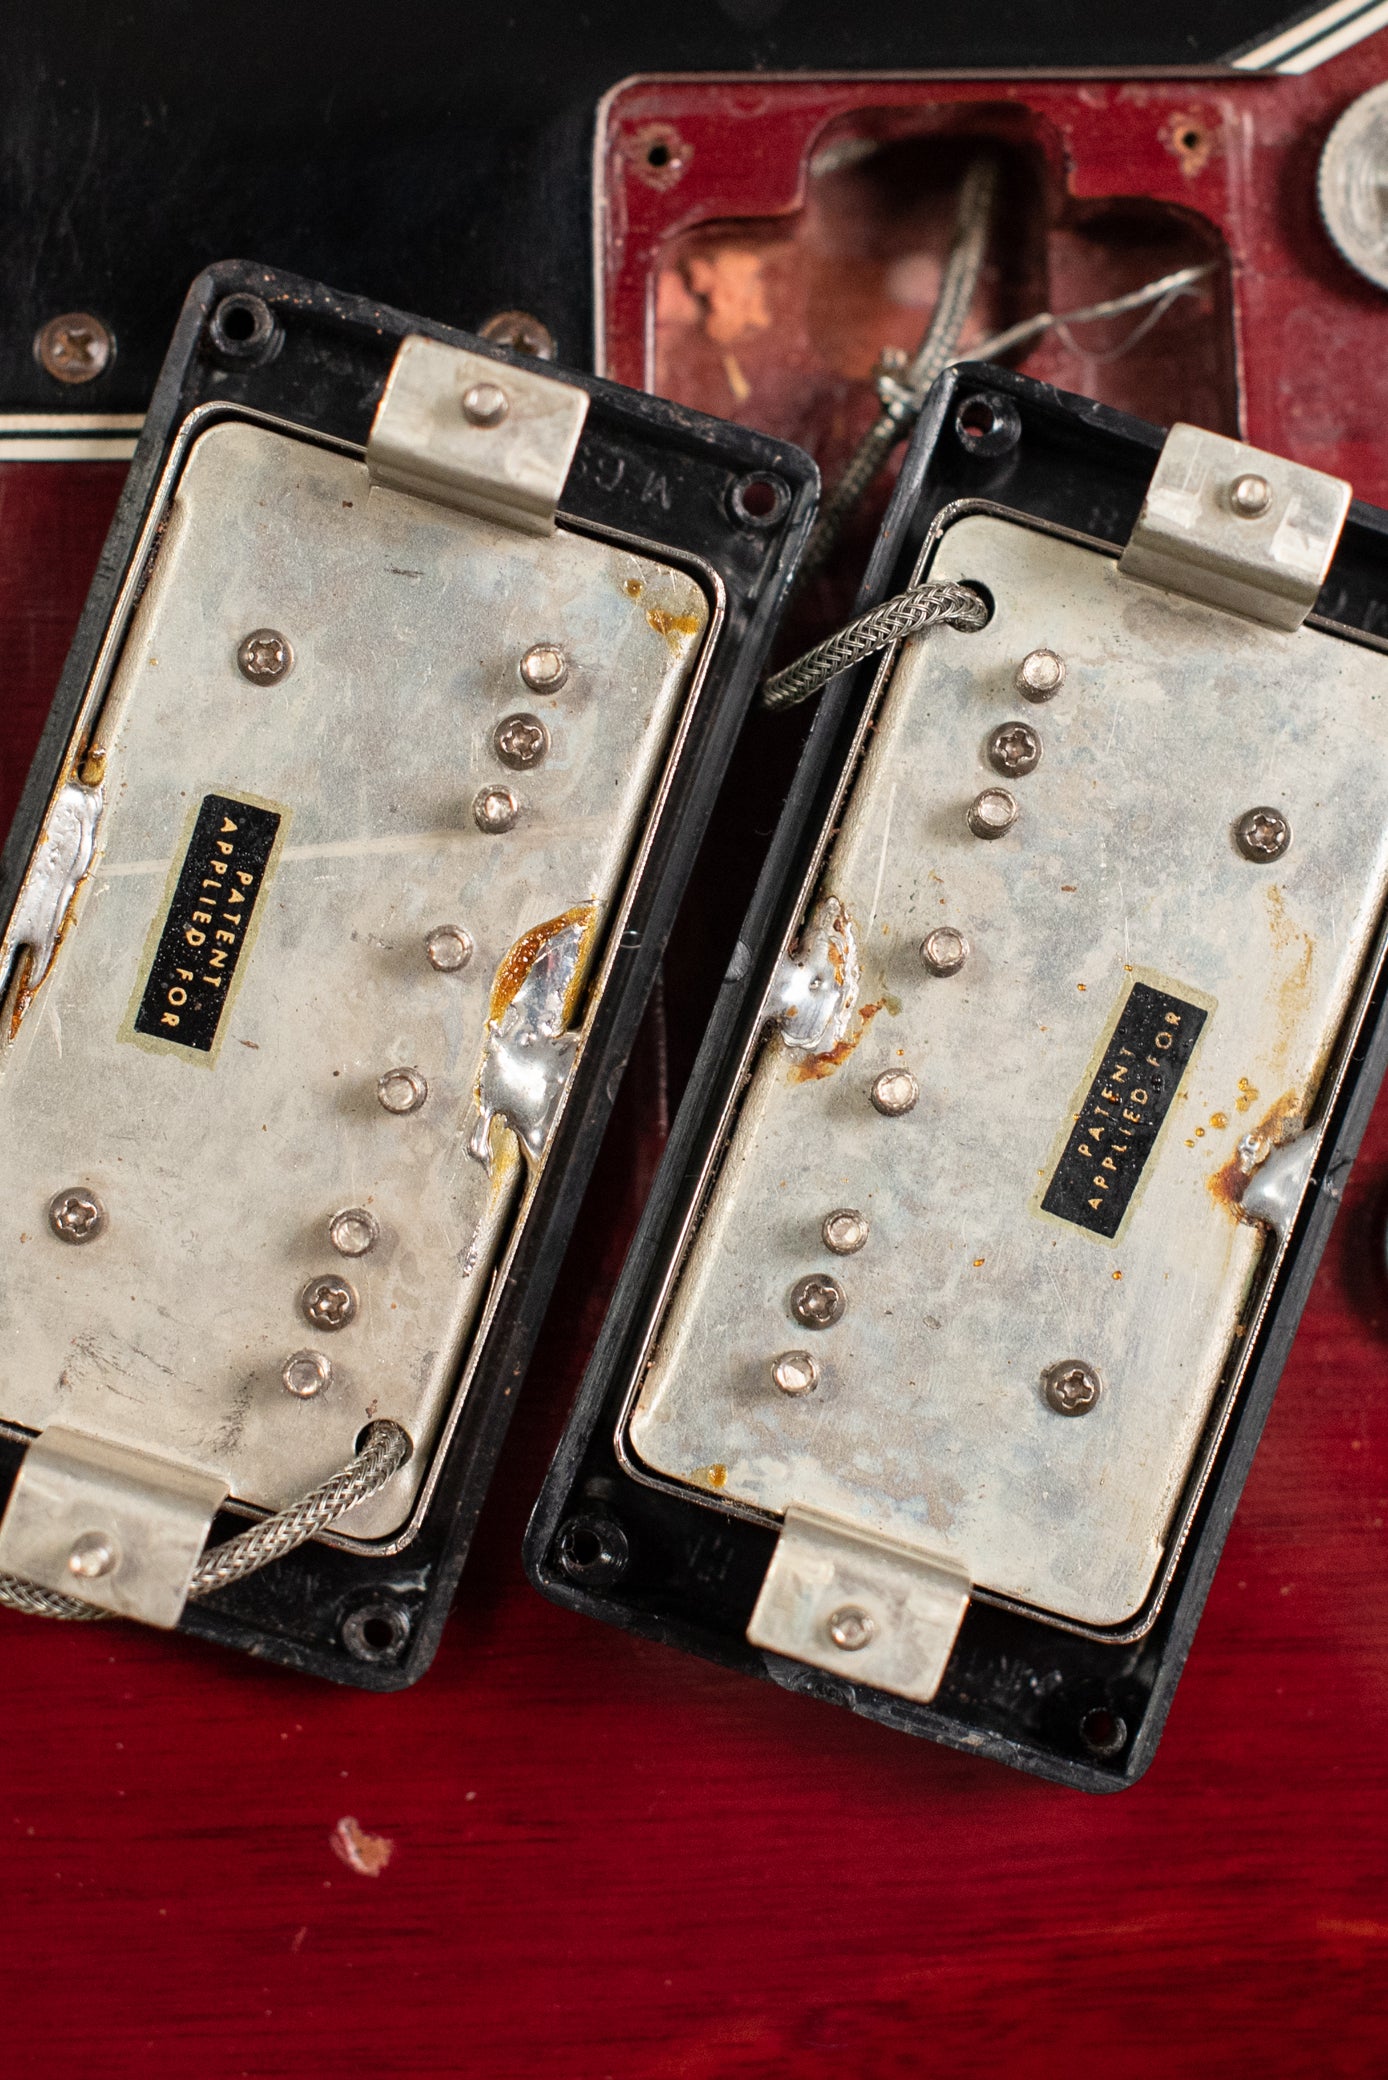 Gibson PAF Patent Applied For humbucker pickups